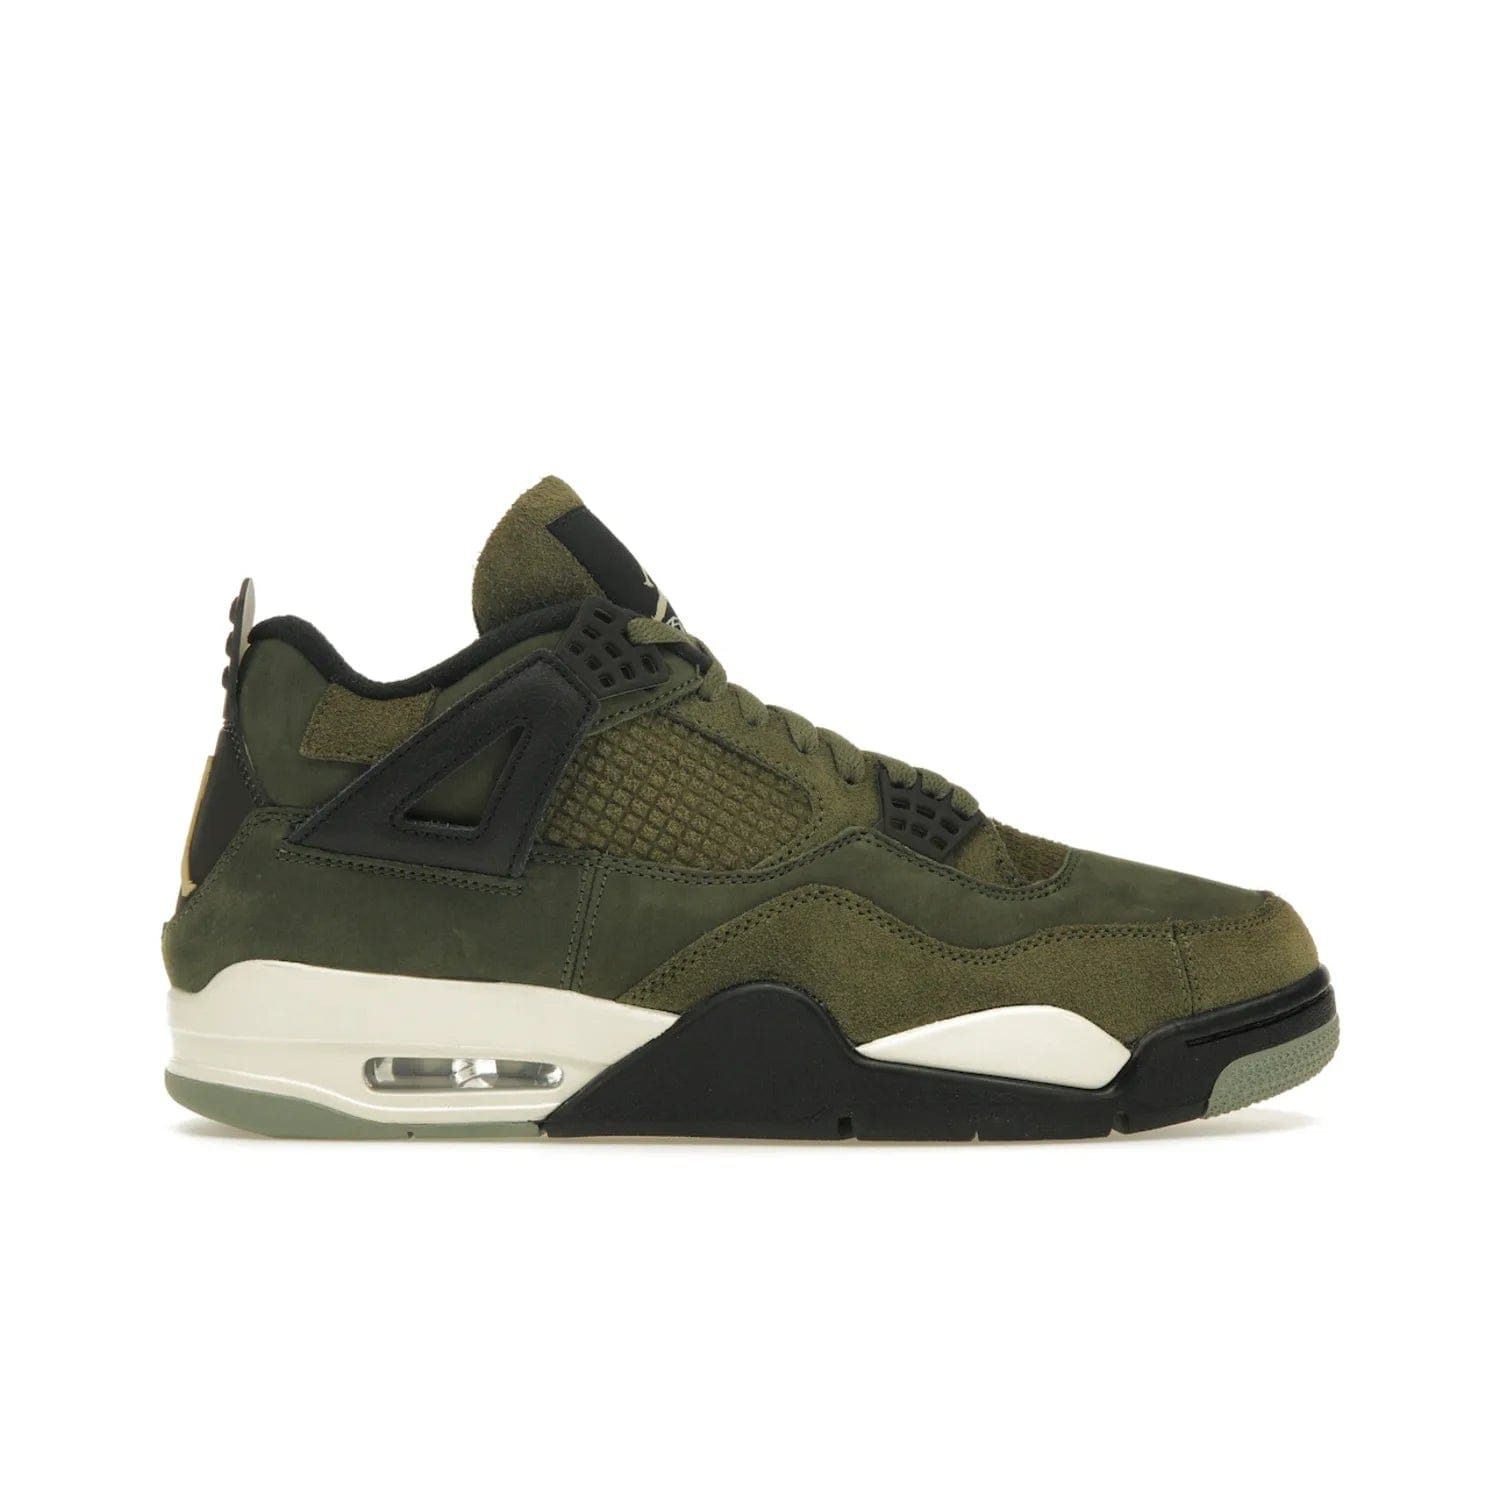 Jordan 4 Retro SE Craft Medium Olive - Image 1 - Only at www.BallersClubKickz.com - Grab the Jordan 4 Retro SE Crafts for a unique style. Combines Medium Olive, Pale Vanilla, Khaki, Black and Sail, with same classic shape, cushioning, and rubber outsole. Available on November 18th!